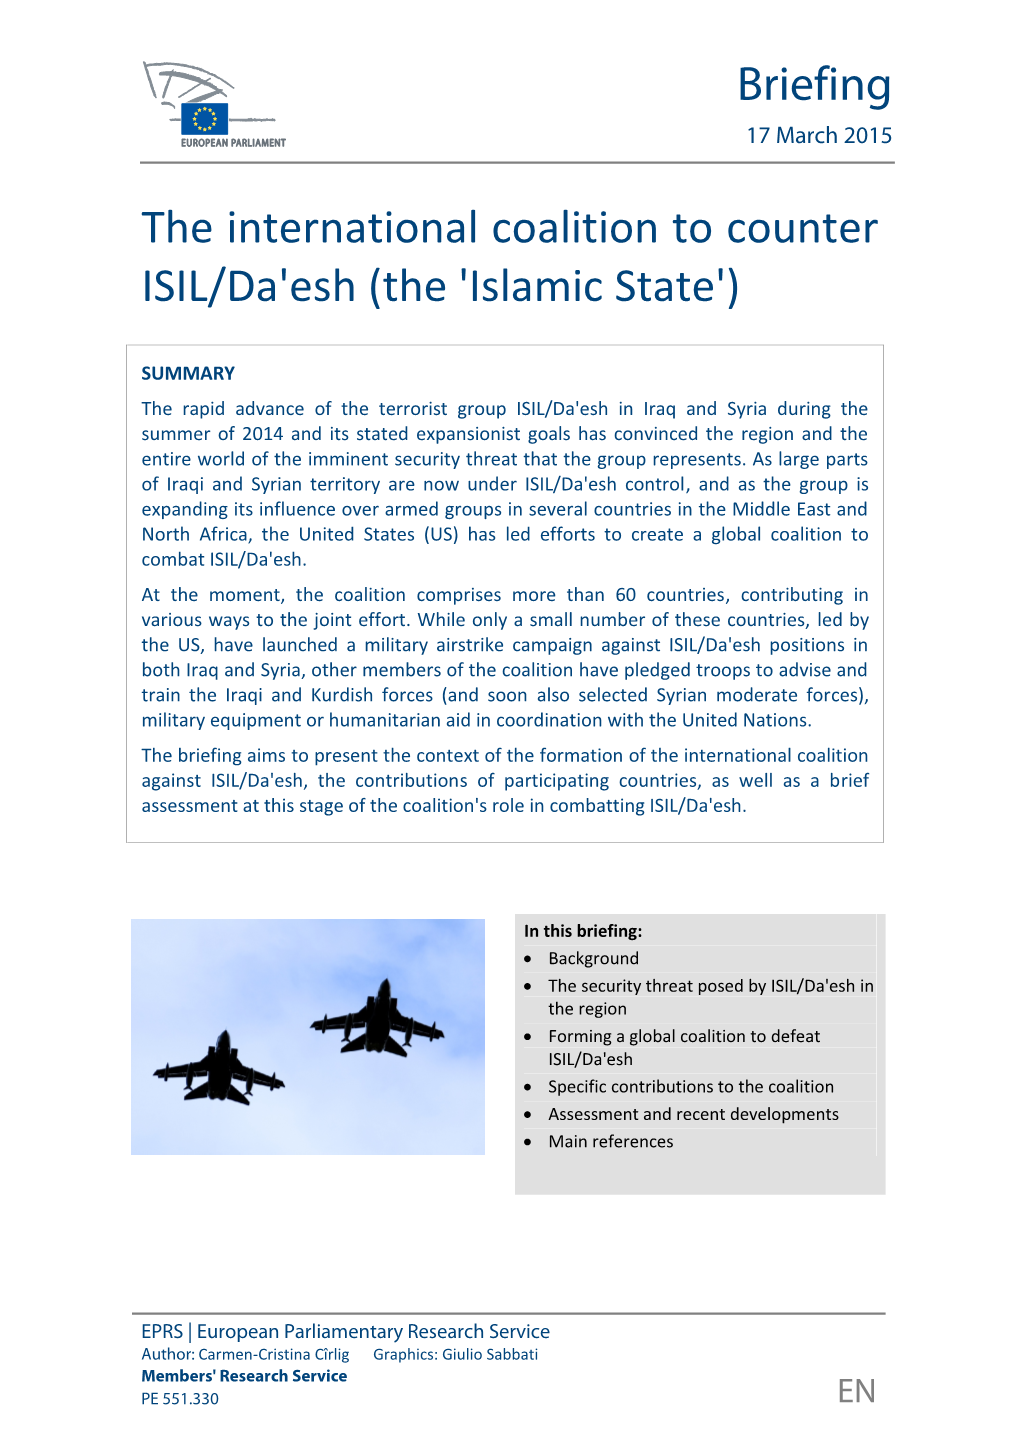 The International Coalition to Counter ISIL/Da'esh (The 'Islamic State')